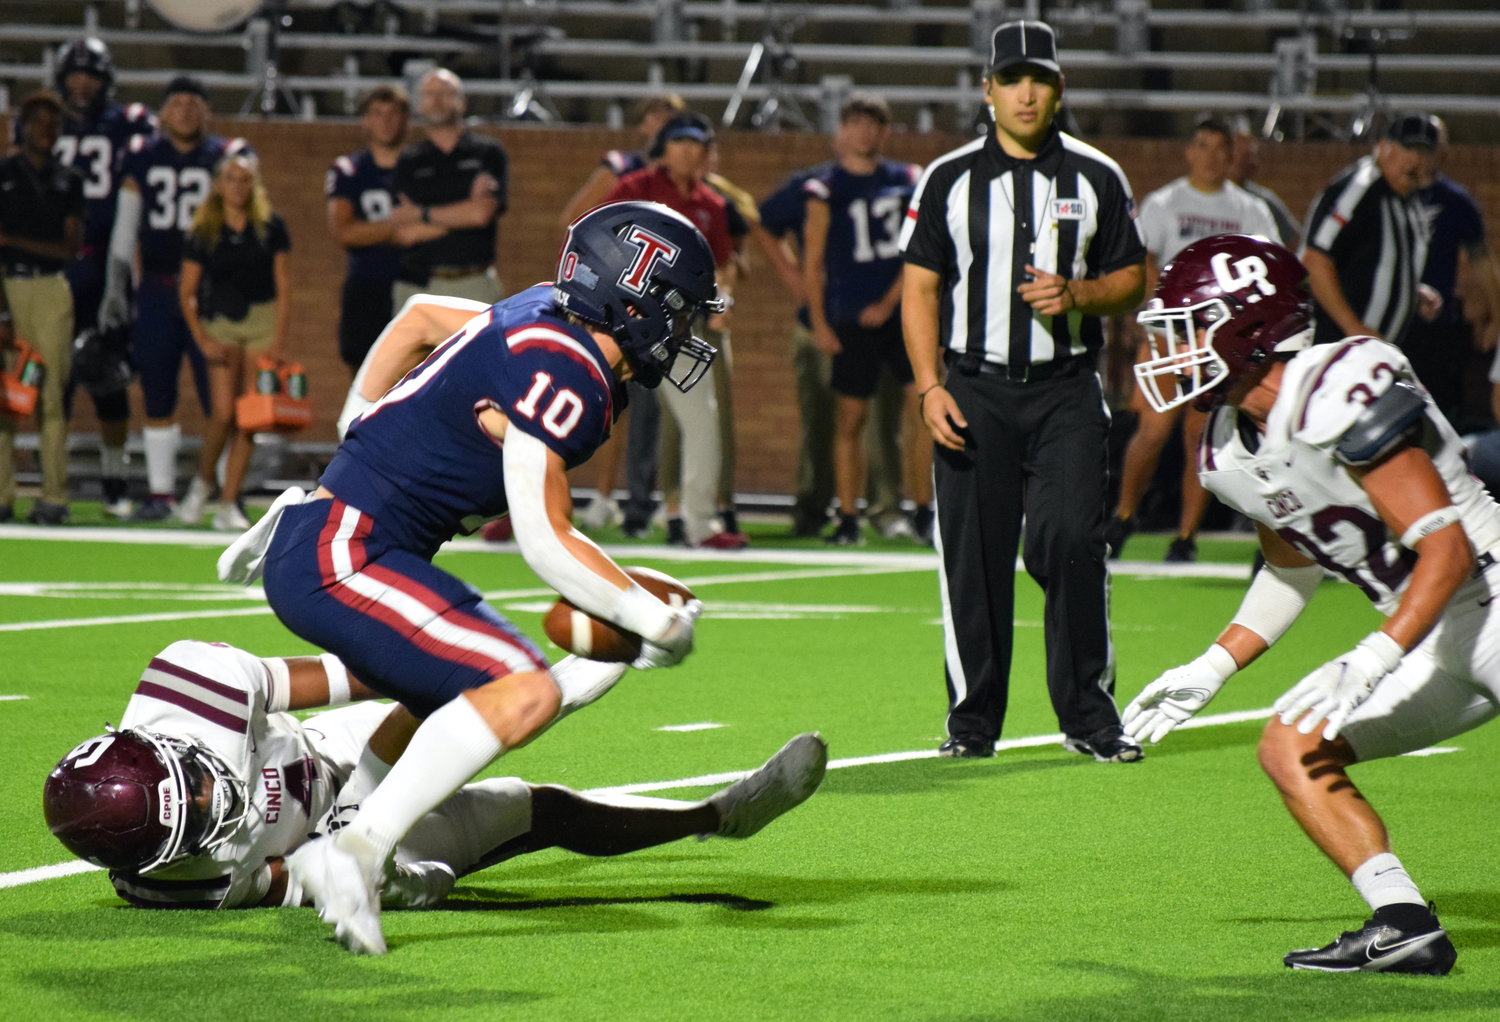 Tompkins’ Wyatt Young tries to break away from Cinco Ranch defenders during a District 19-6A game at Rhodes Stadium on Thursday.